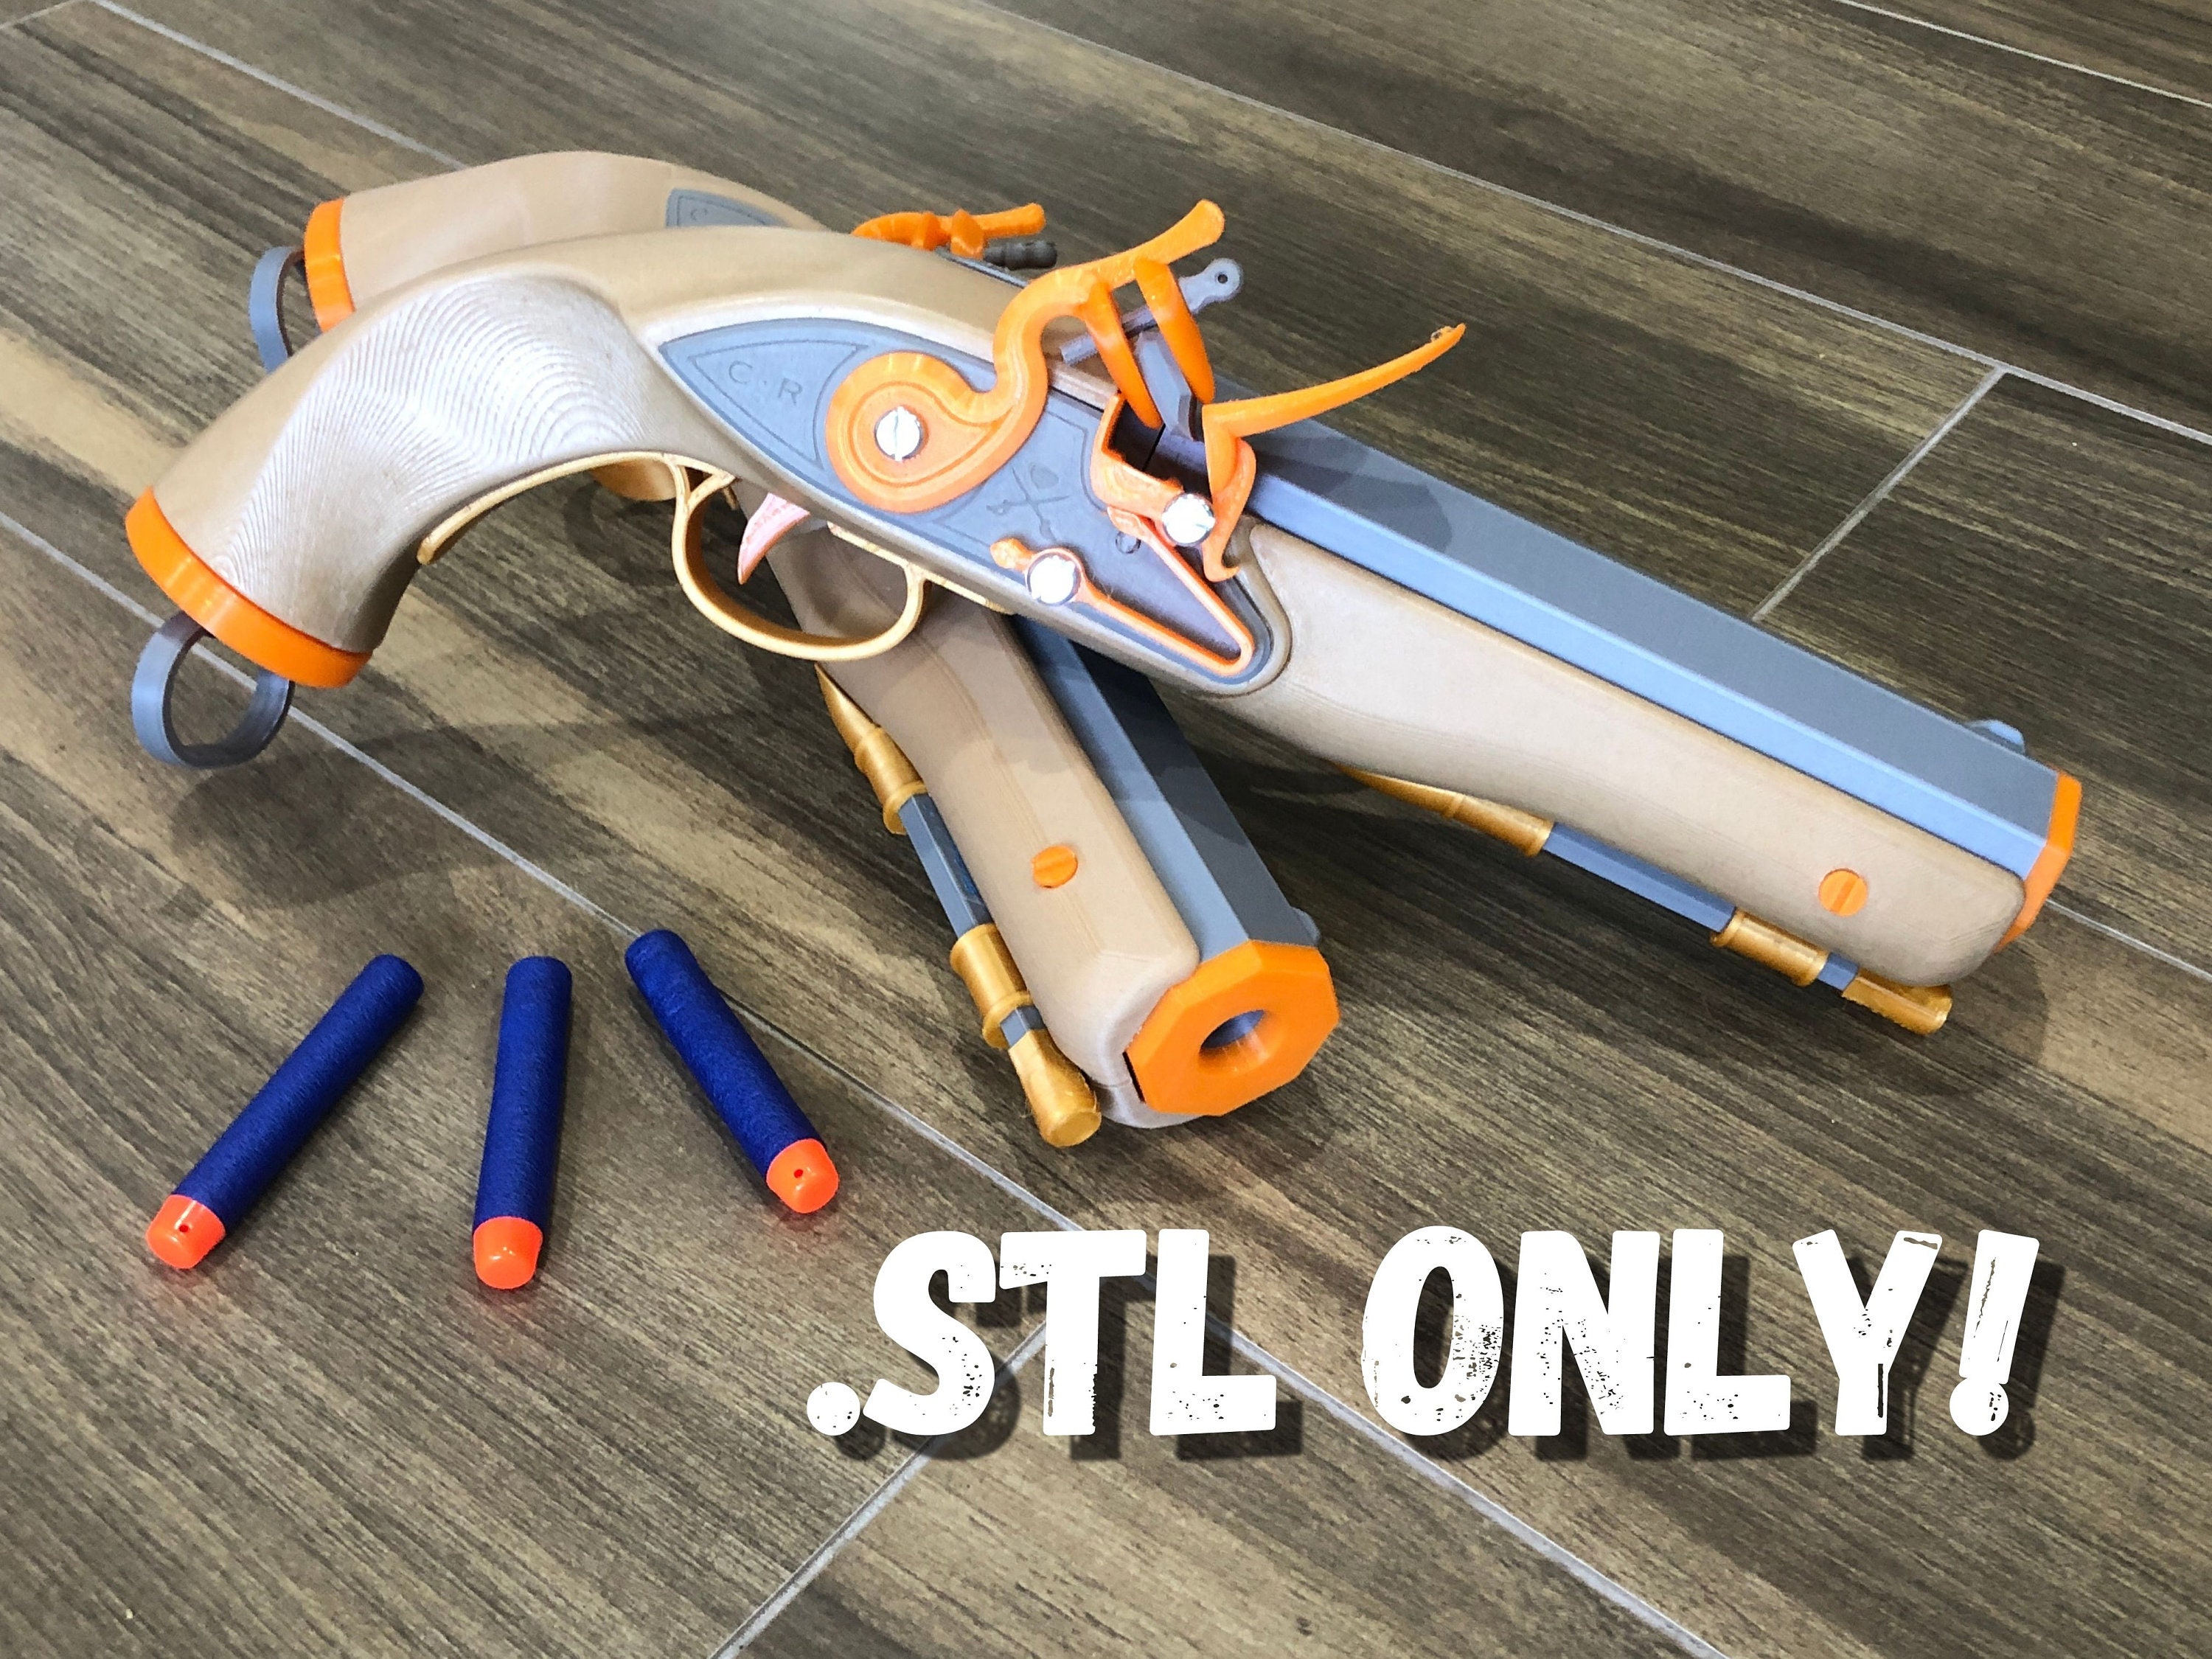 My Nerf Flintlock Pistol Is Complete! It Launches Rival, 45% OFF